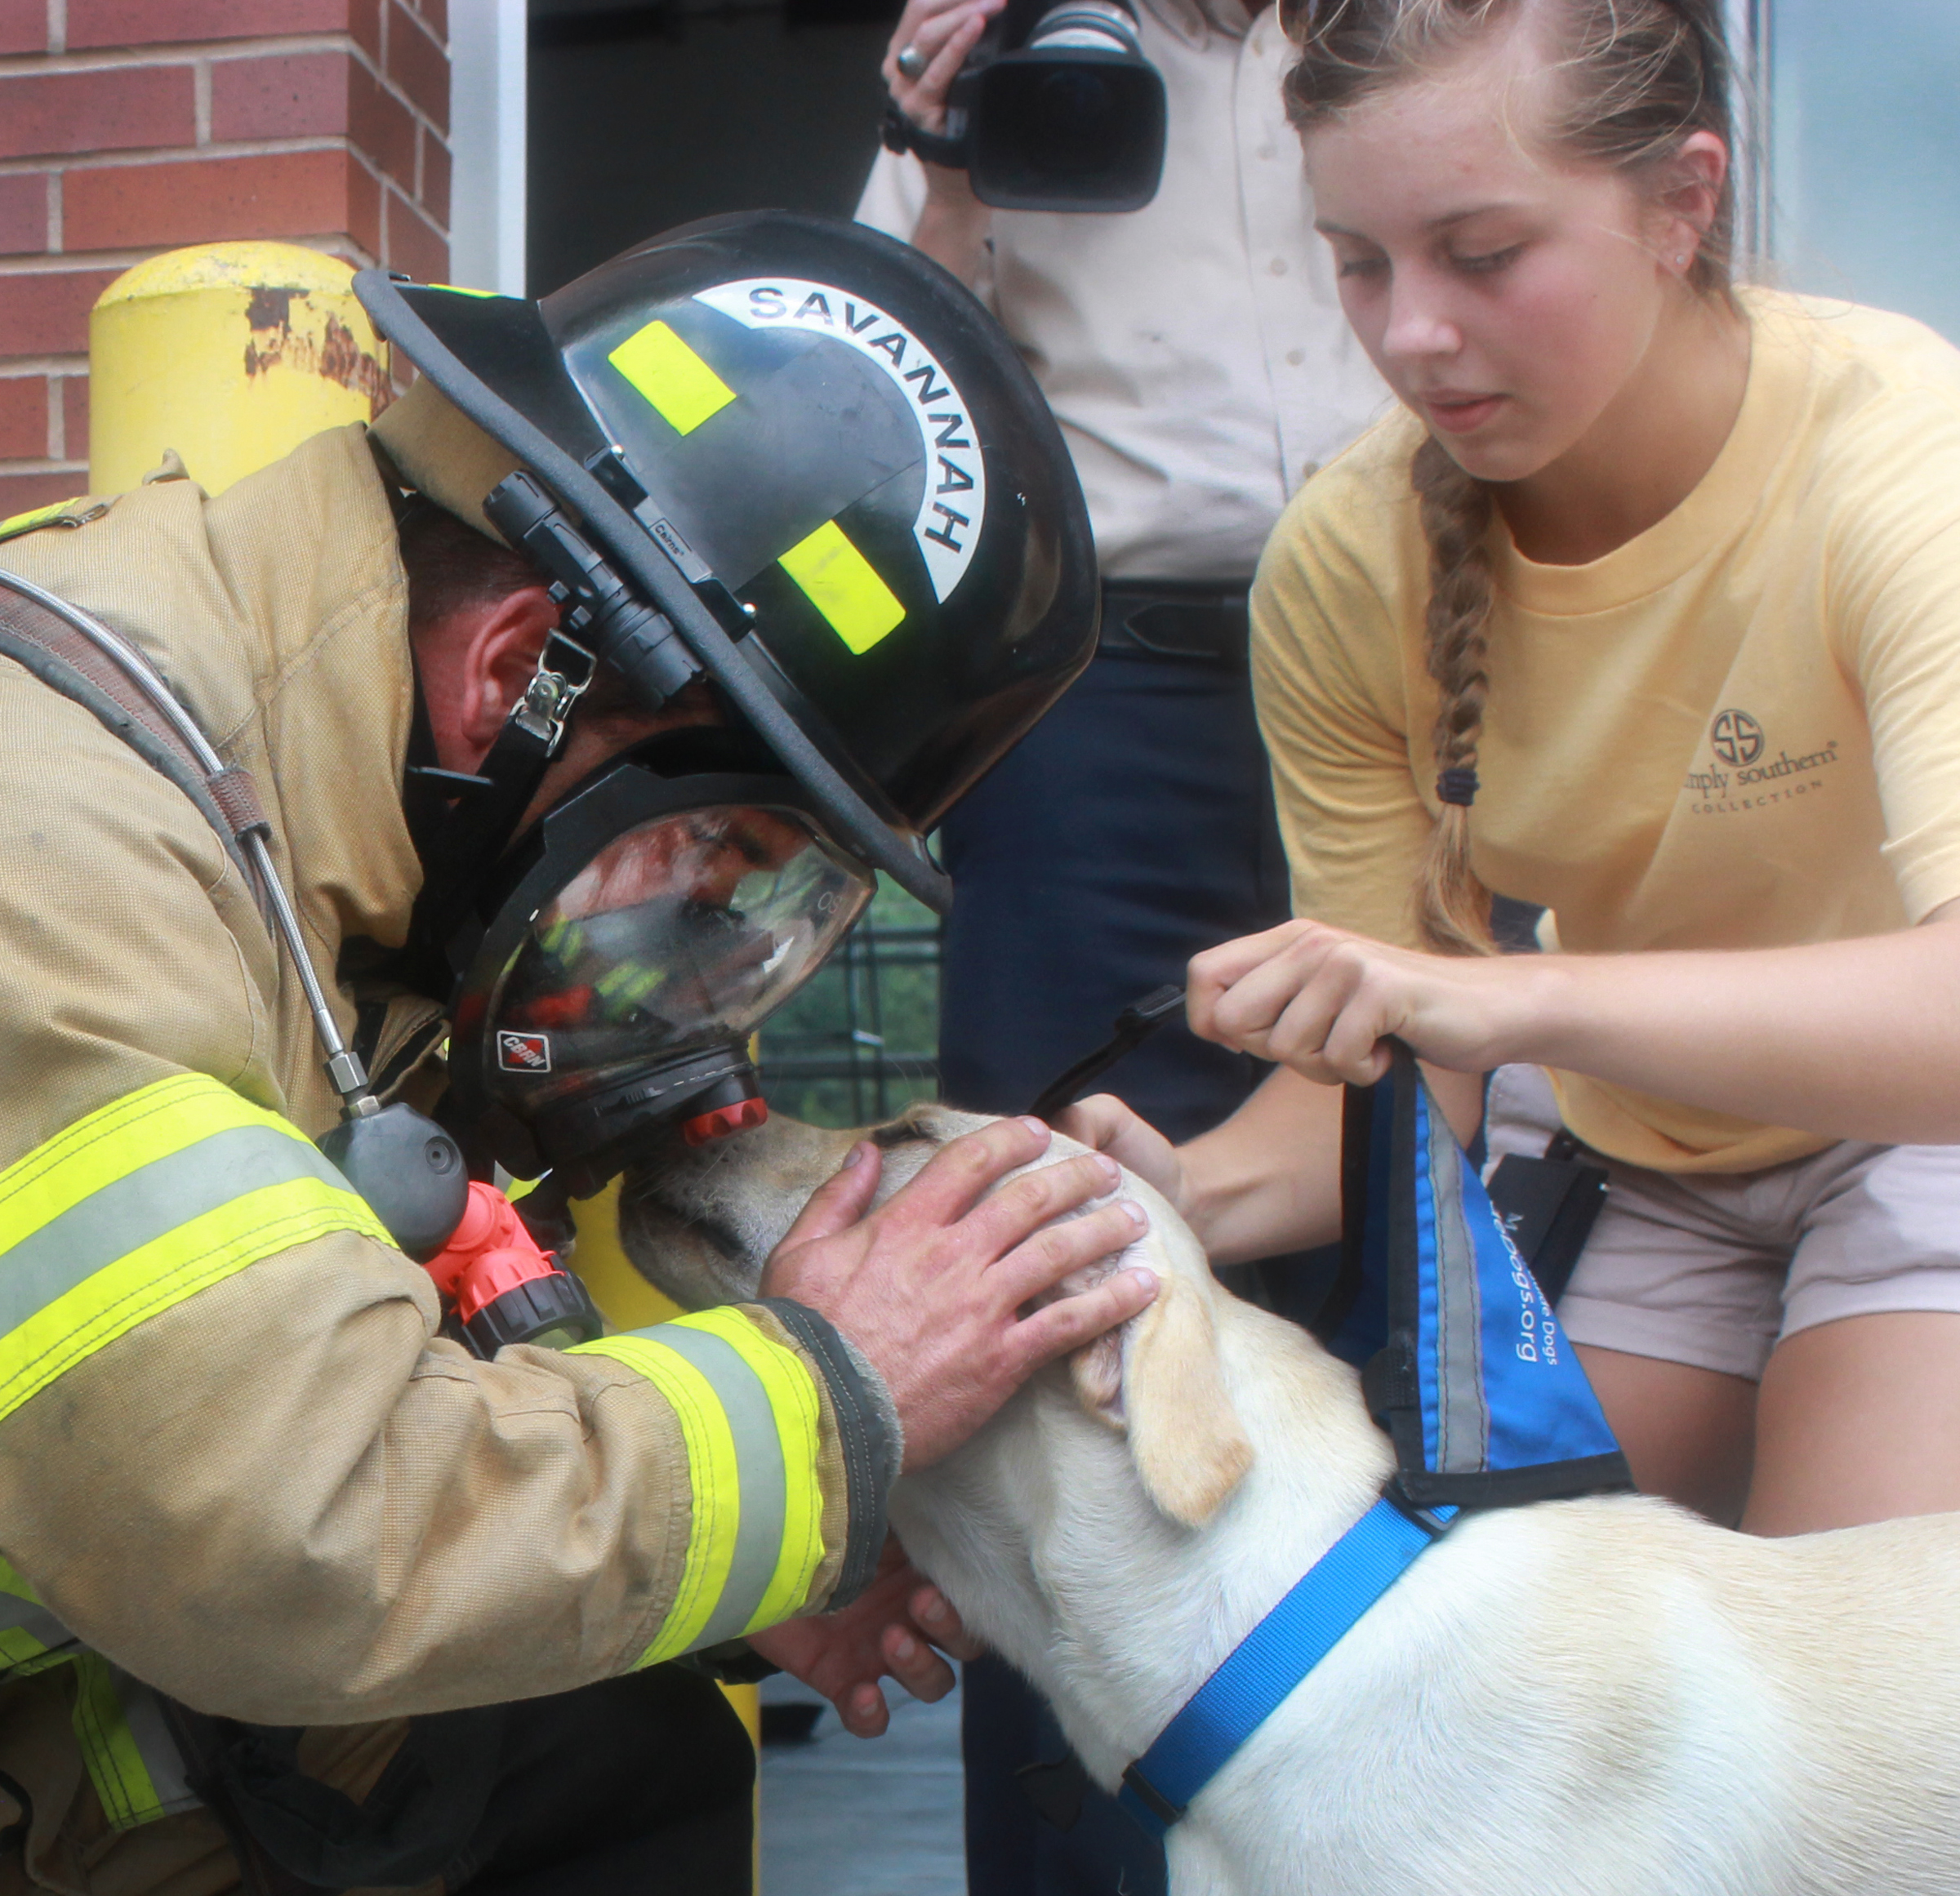  Mullins the yellow Lab, a service dog in training, nuzzles up to a Savannah firefighter in July 2015 while trying to get used to loud noises and first responders for emergency situations. &nbsp;(Dash Coleman/Savannah Morning News)&nbsp; 